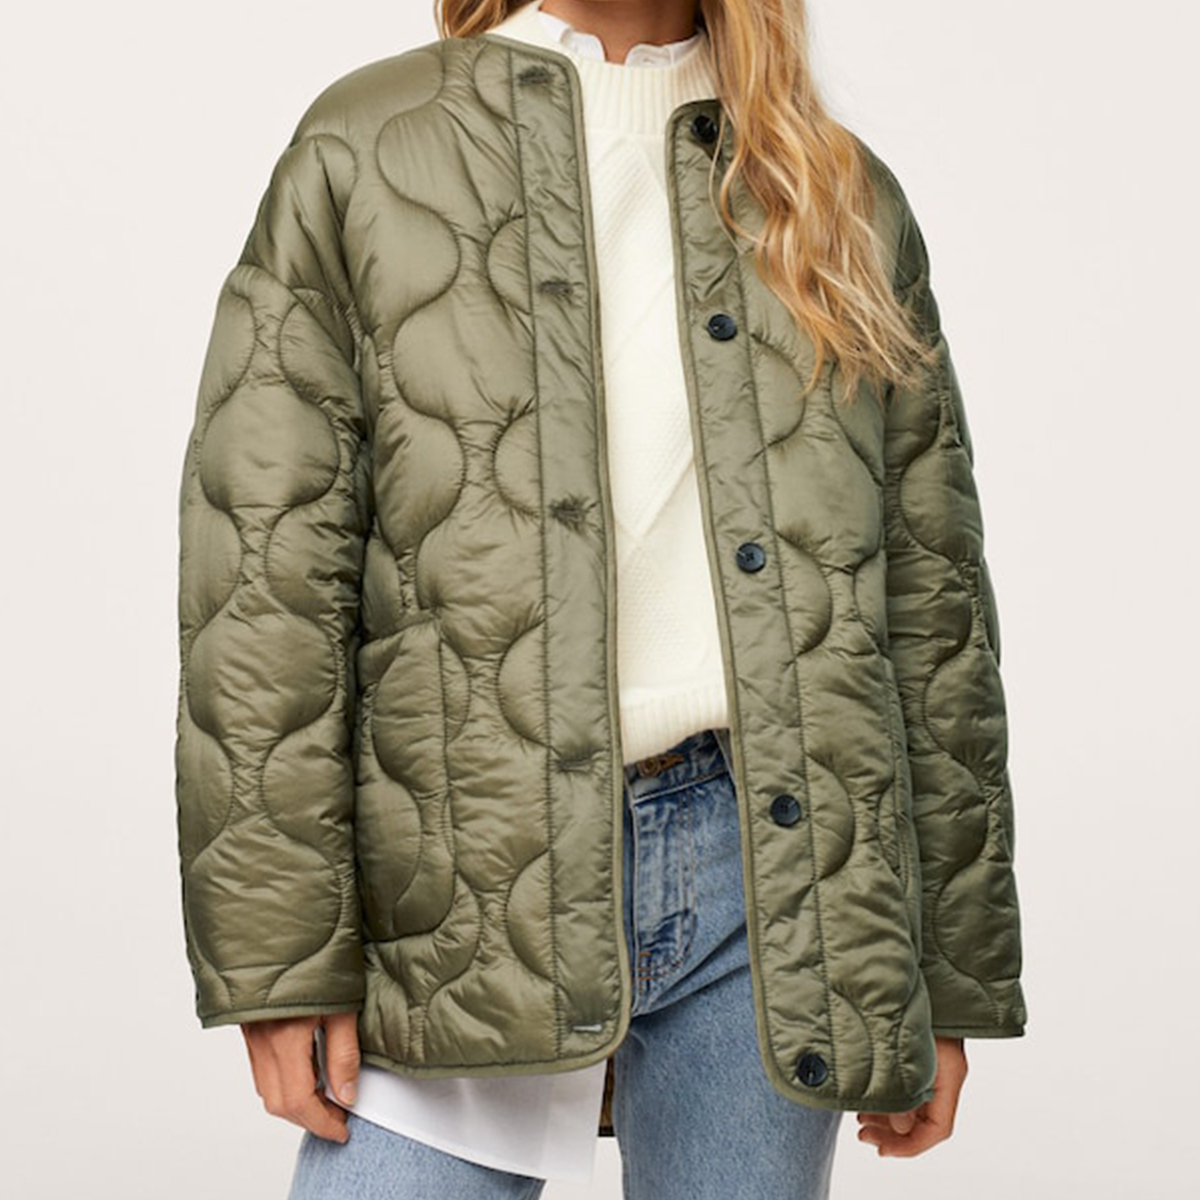 Cloud Coats Are Proving to Be the Smartest Fall Buy of 2021